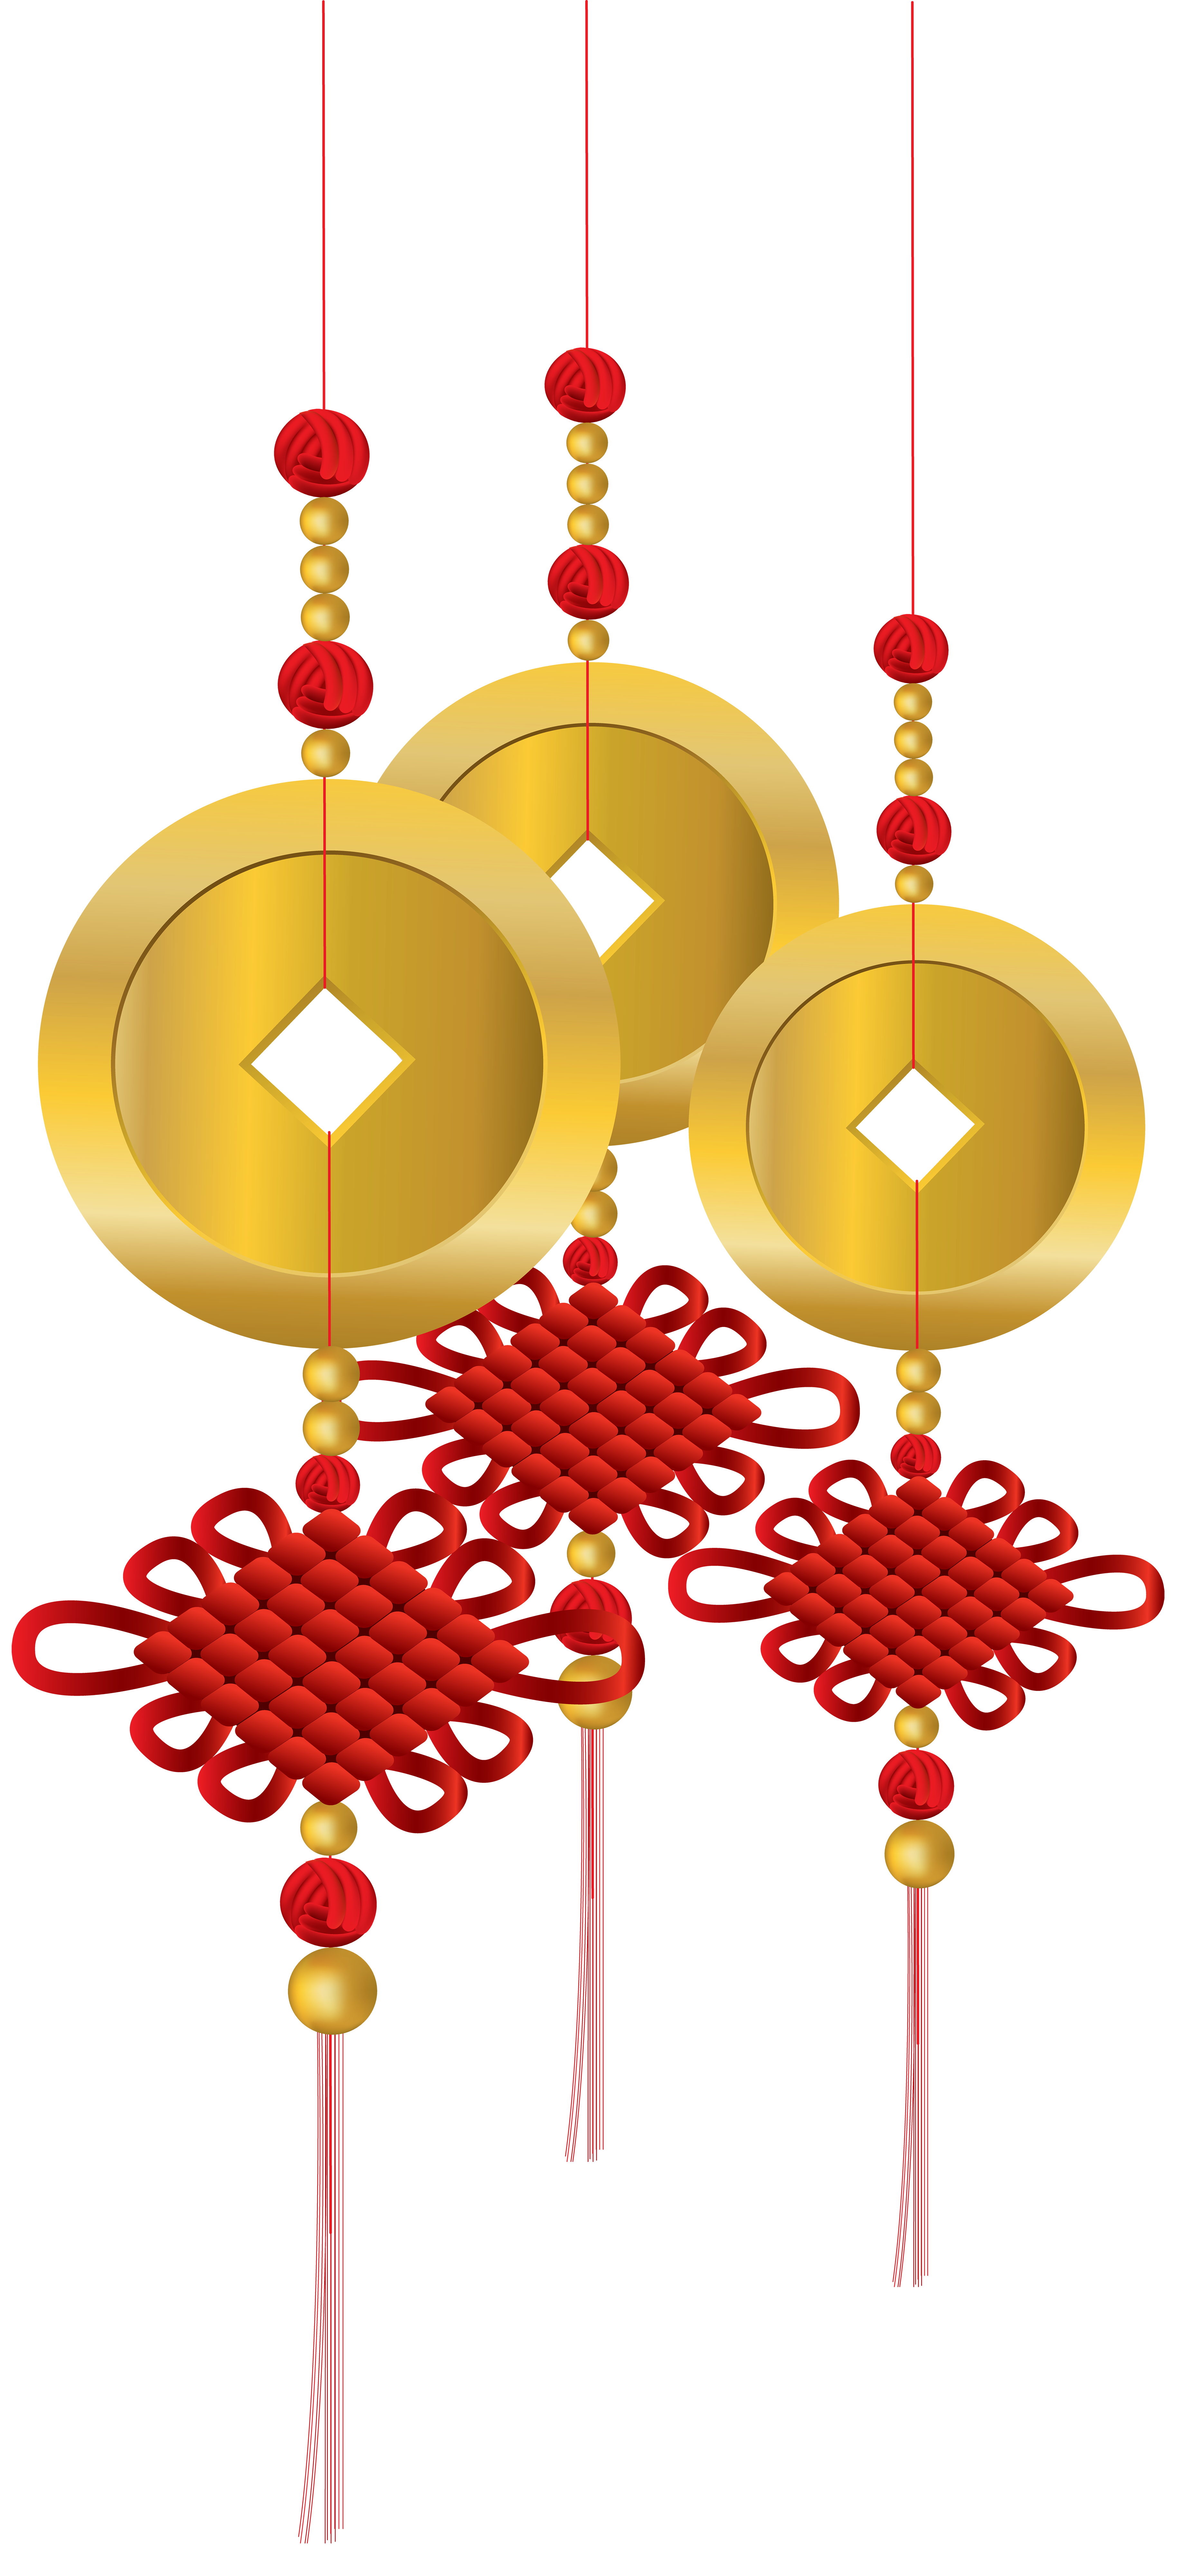 Ornaments clipart clip art. Chinese knot decoration png